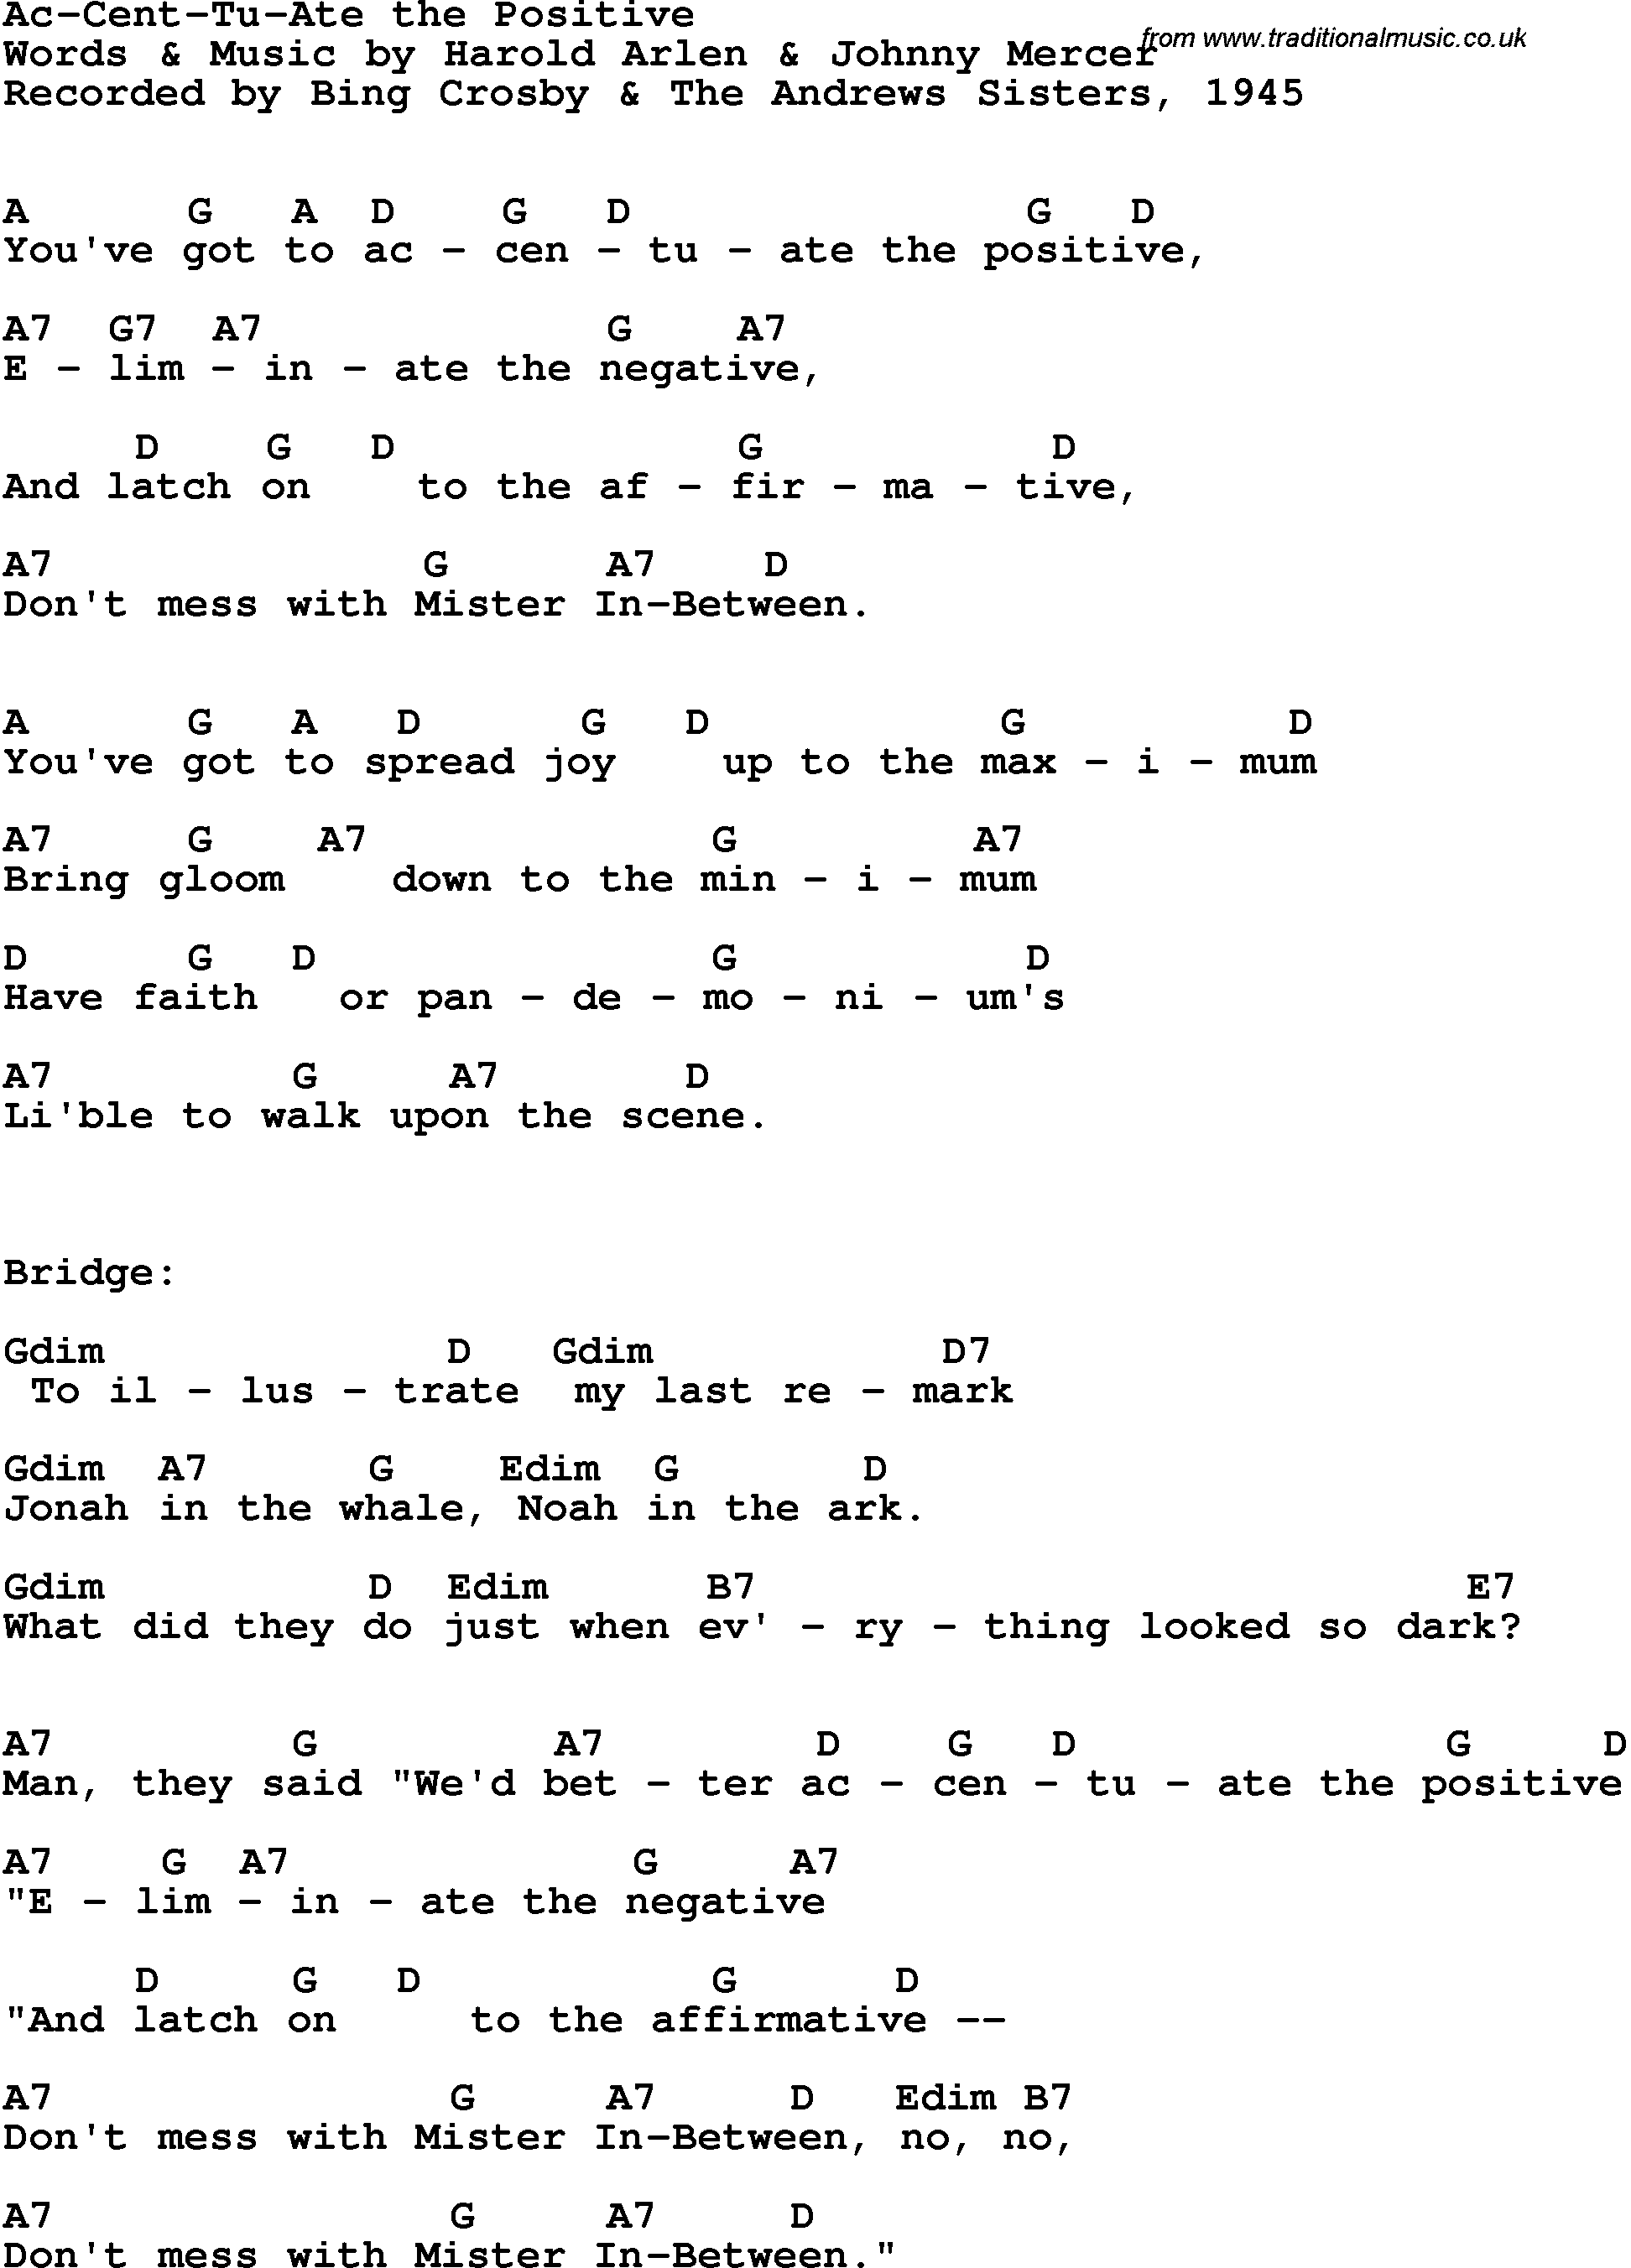 Song Lyrics with guitar chords for Accentuac-cen-tu-ate The Positive - Bing Crosby & The Andrews Sisters, 1942